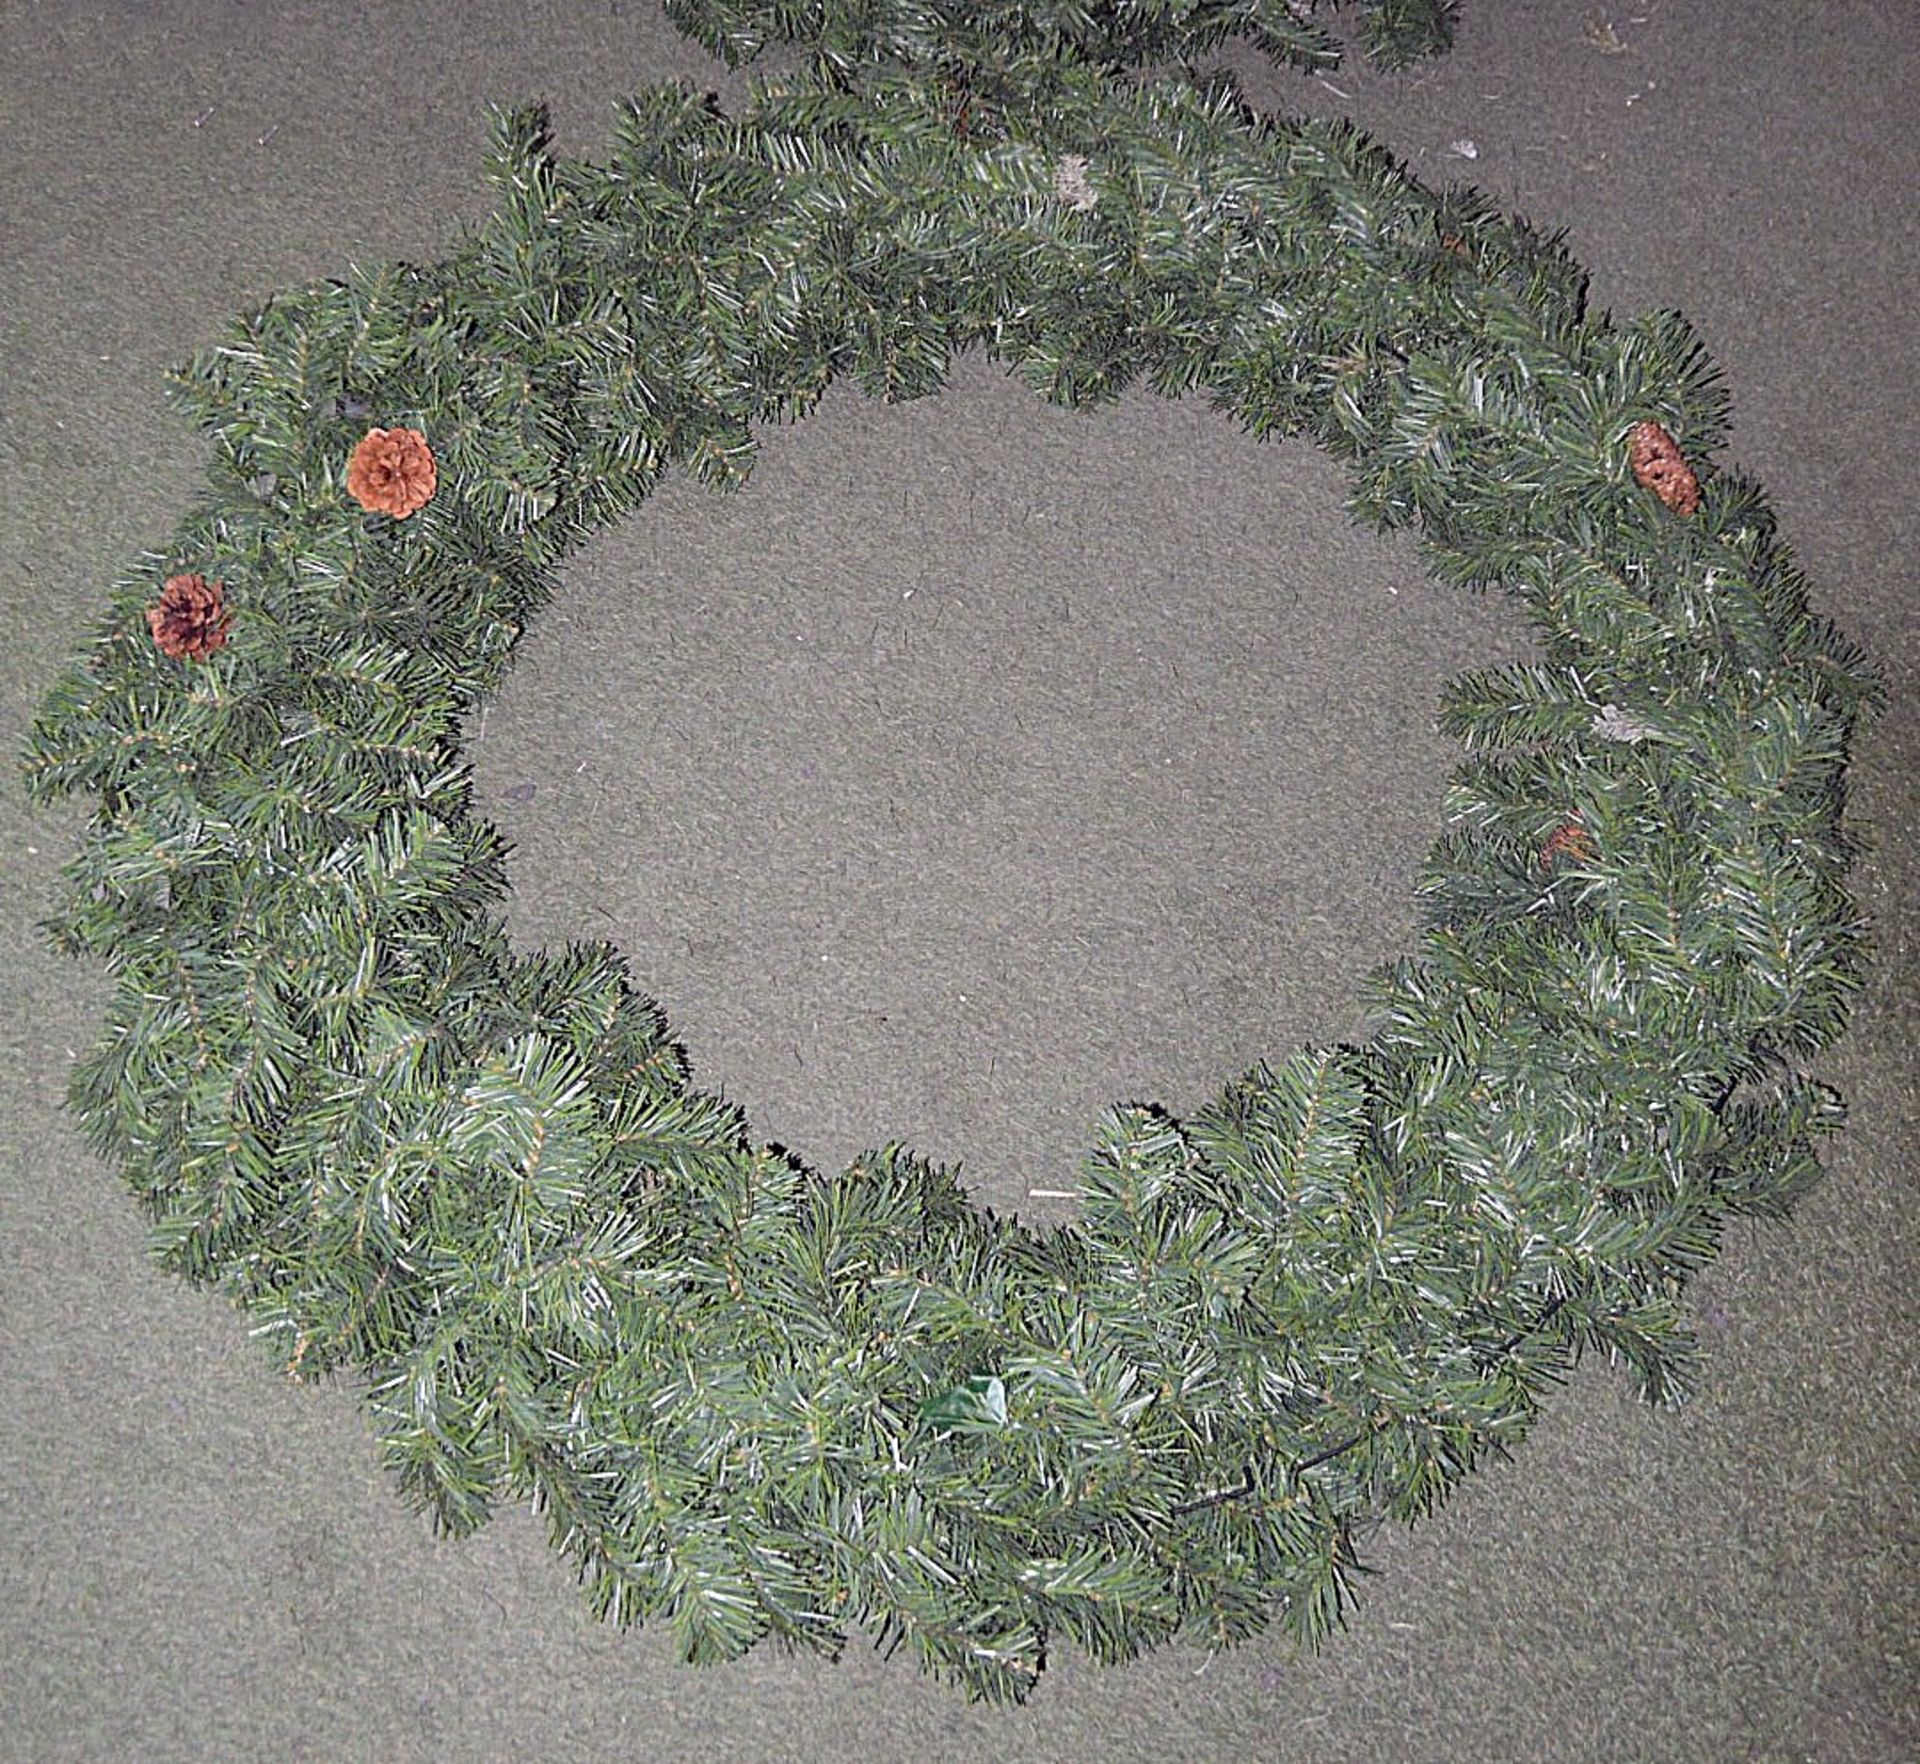 2 x Sections Of Large Commercial Christmas Display Wreaths - Each 1-Metre In Diameter - Ex- - Image 2 of 3